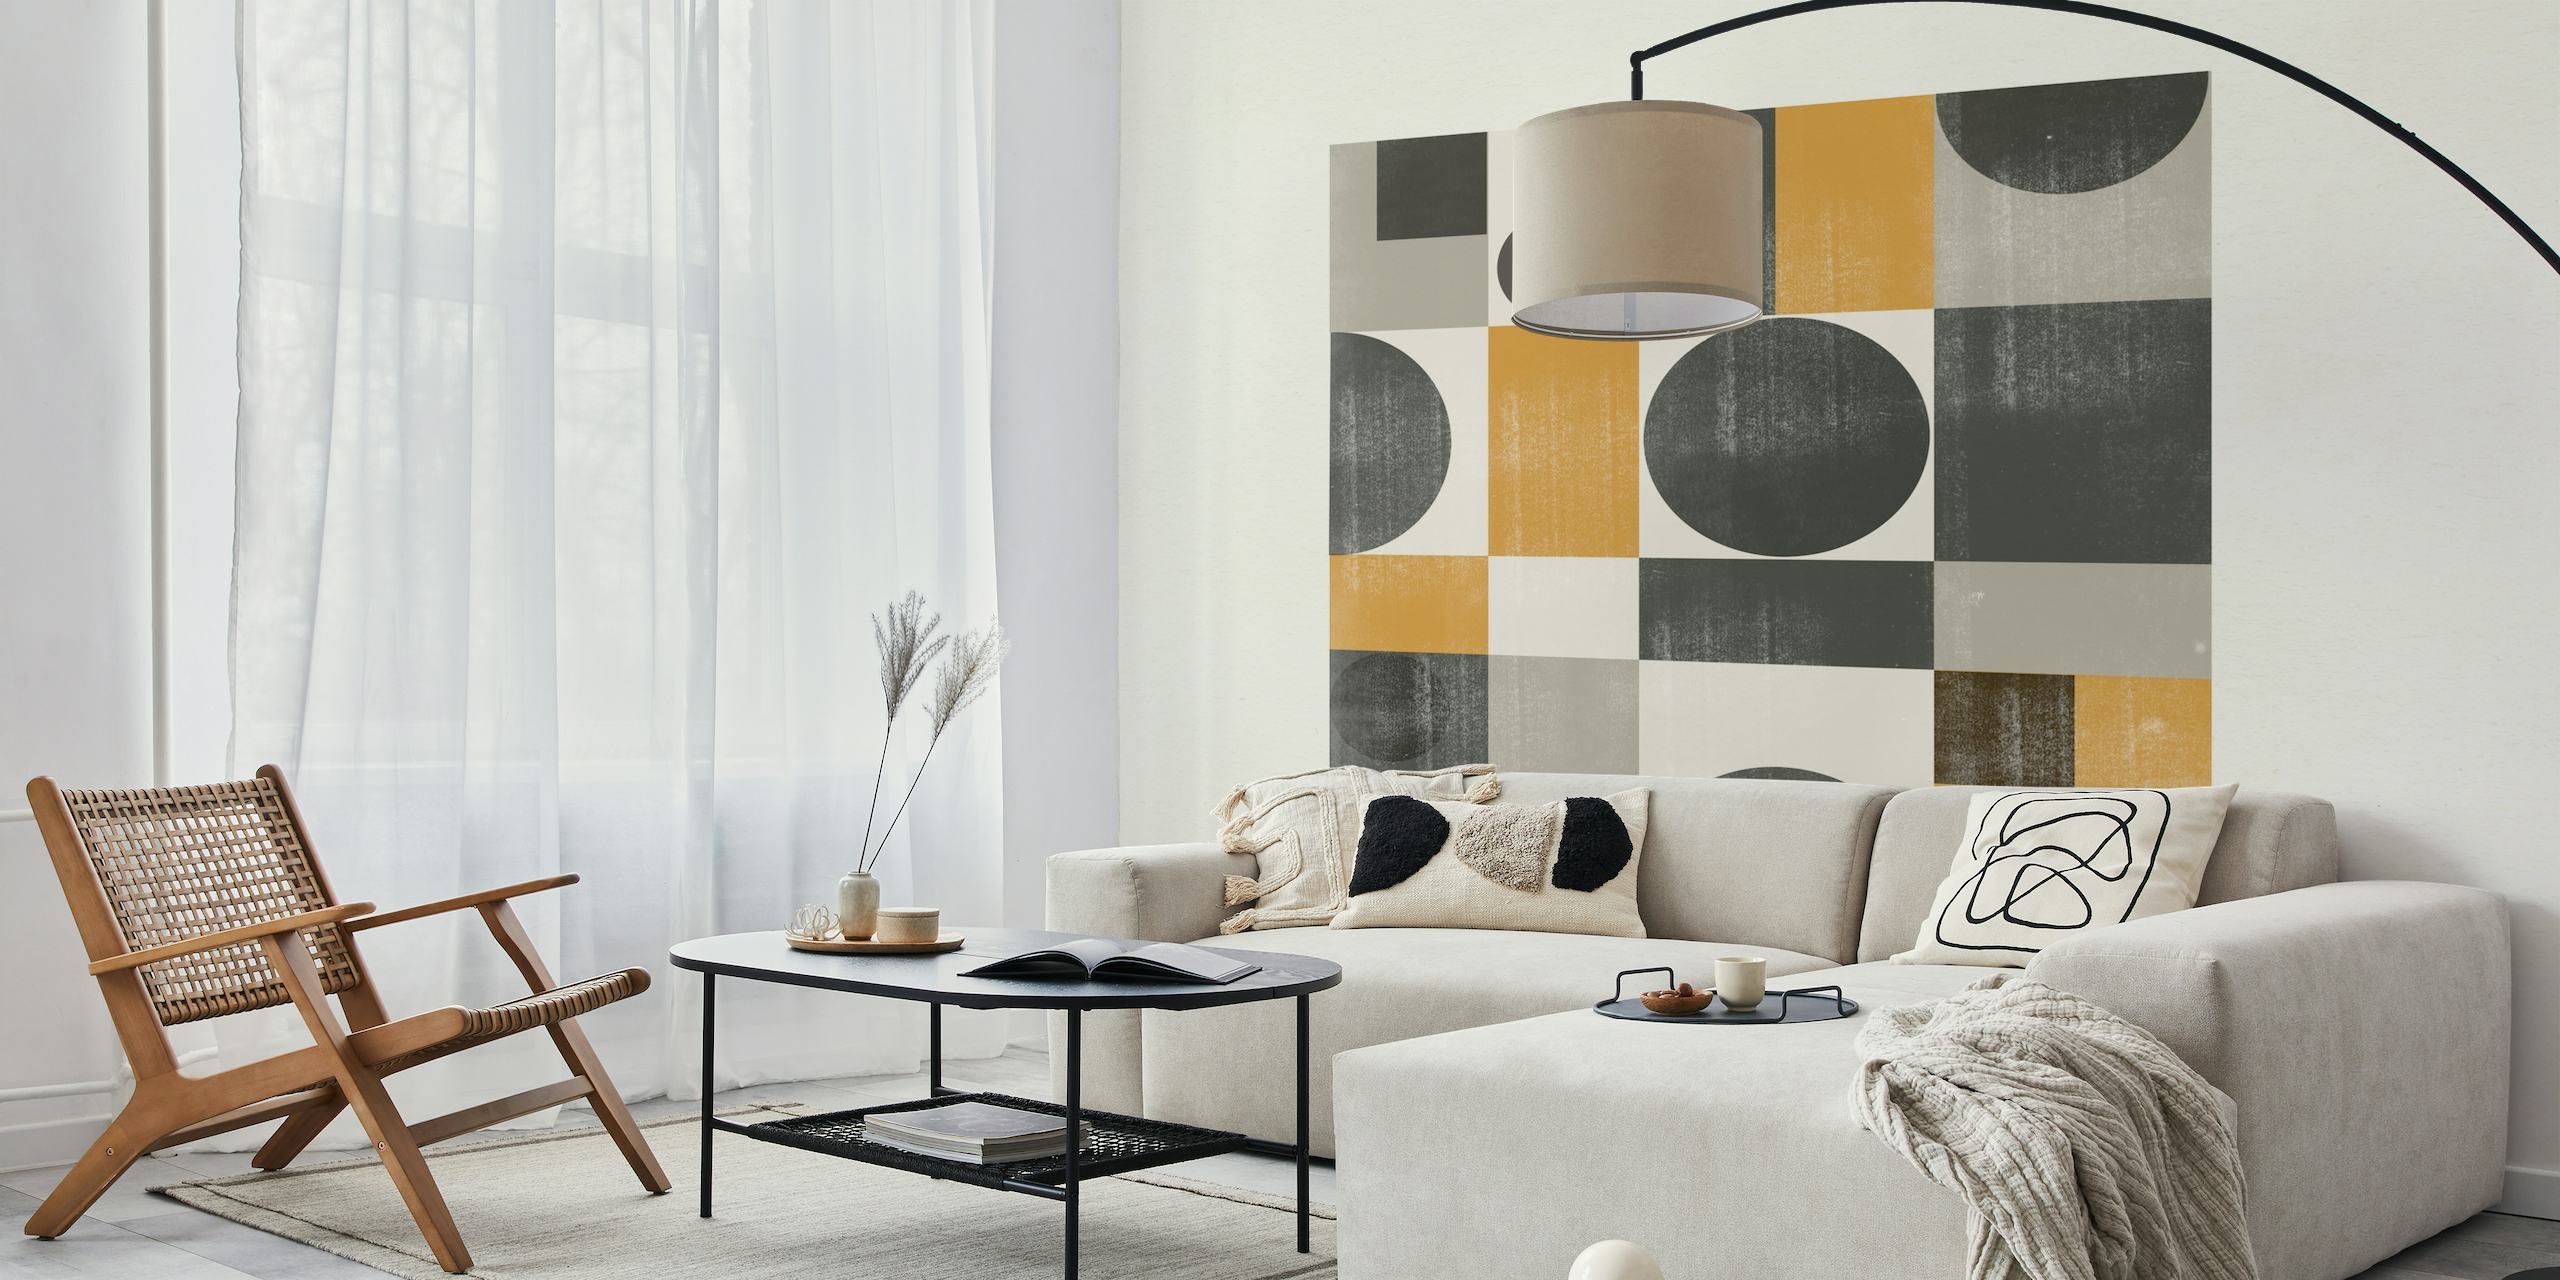 Geometric MidCentury Modern pattern in grey, black, and soft gold for wall mural